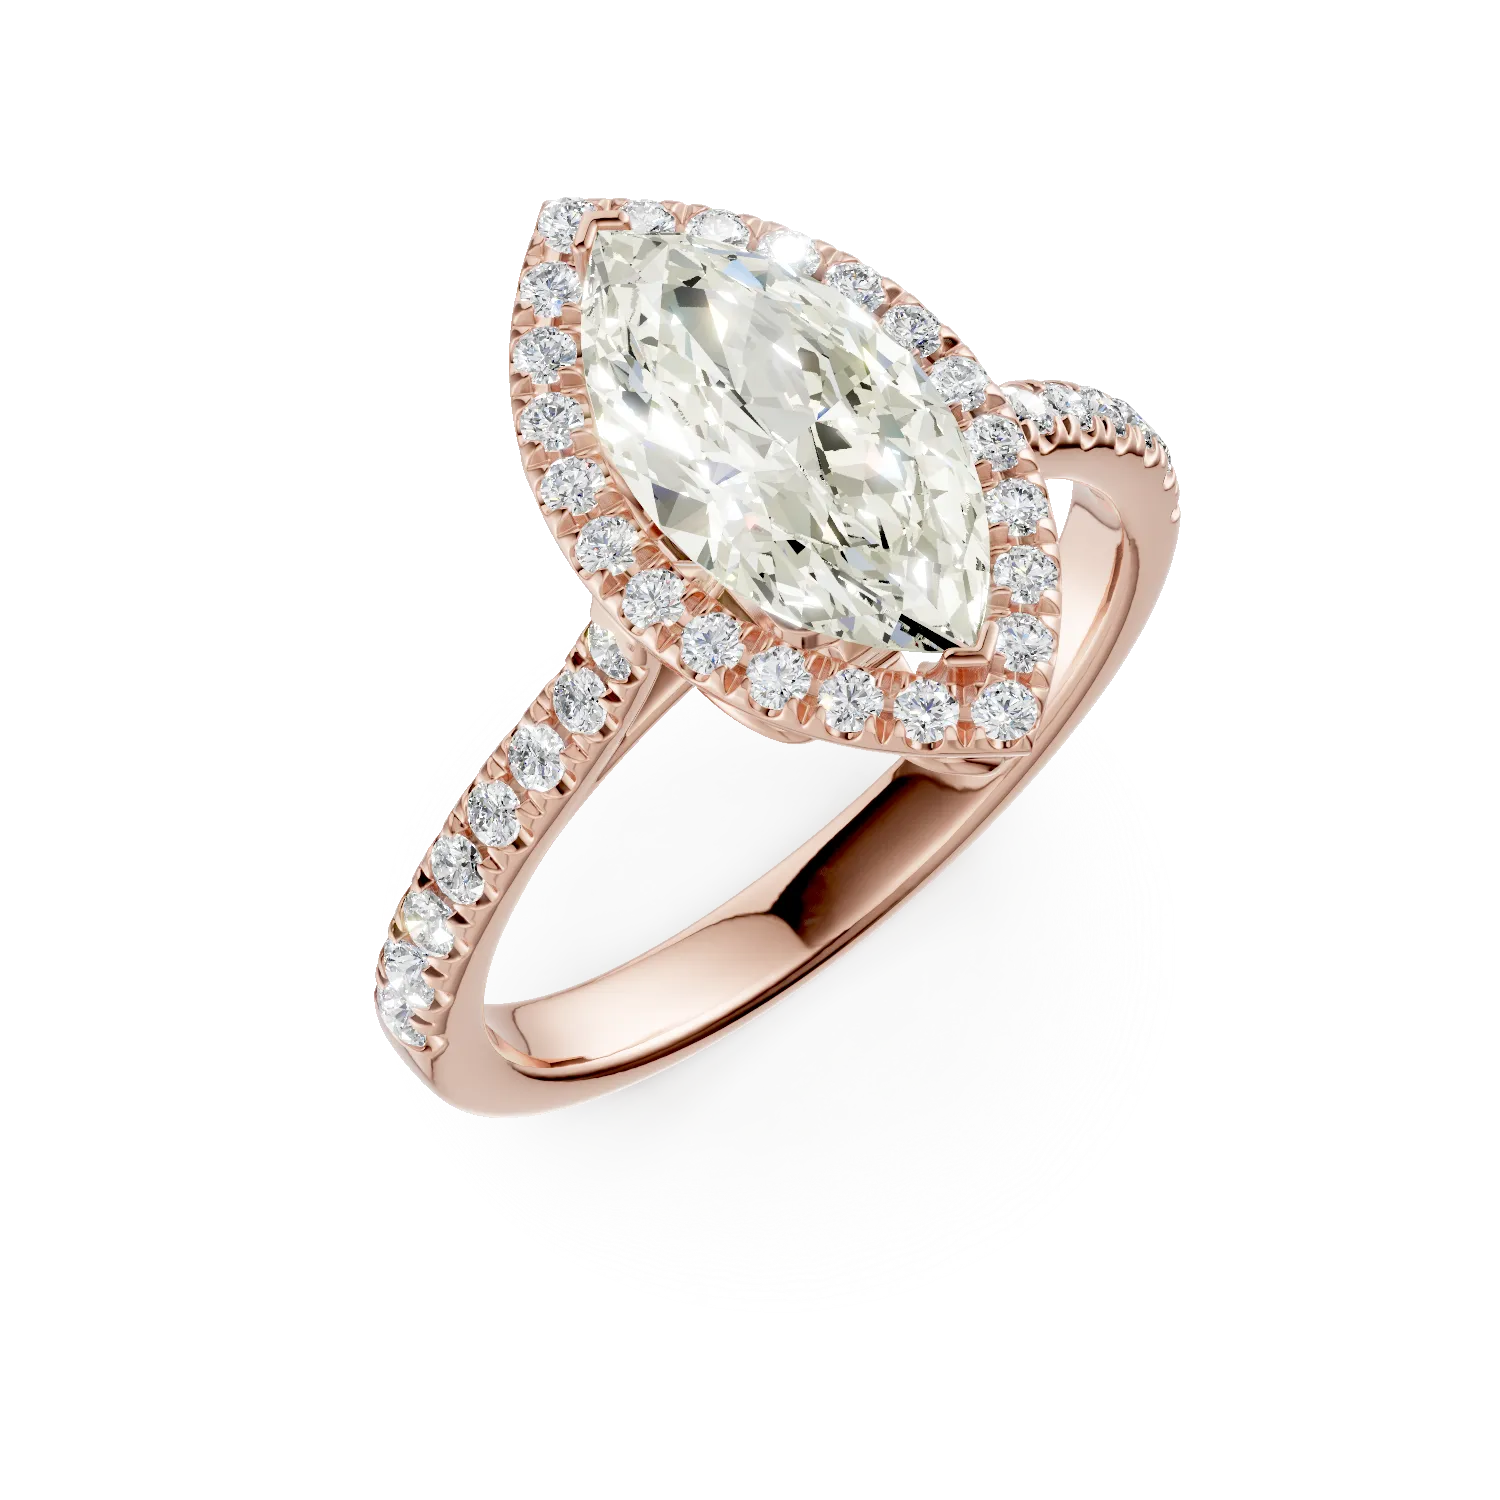 Rose gold engagement ring with 1.5ct diamond and 0.4ct diamonds